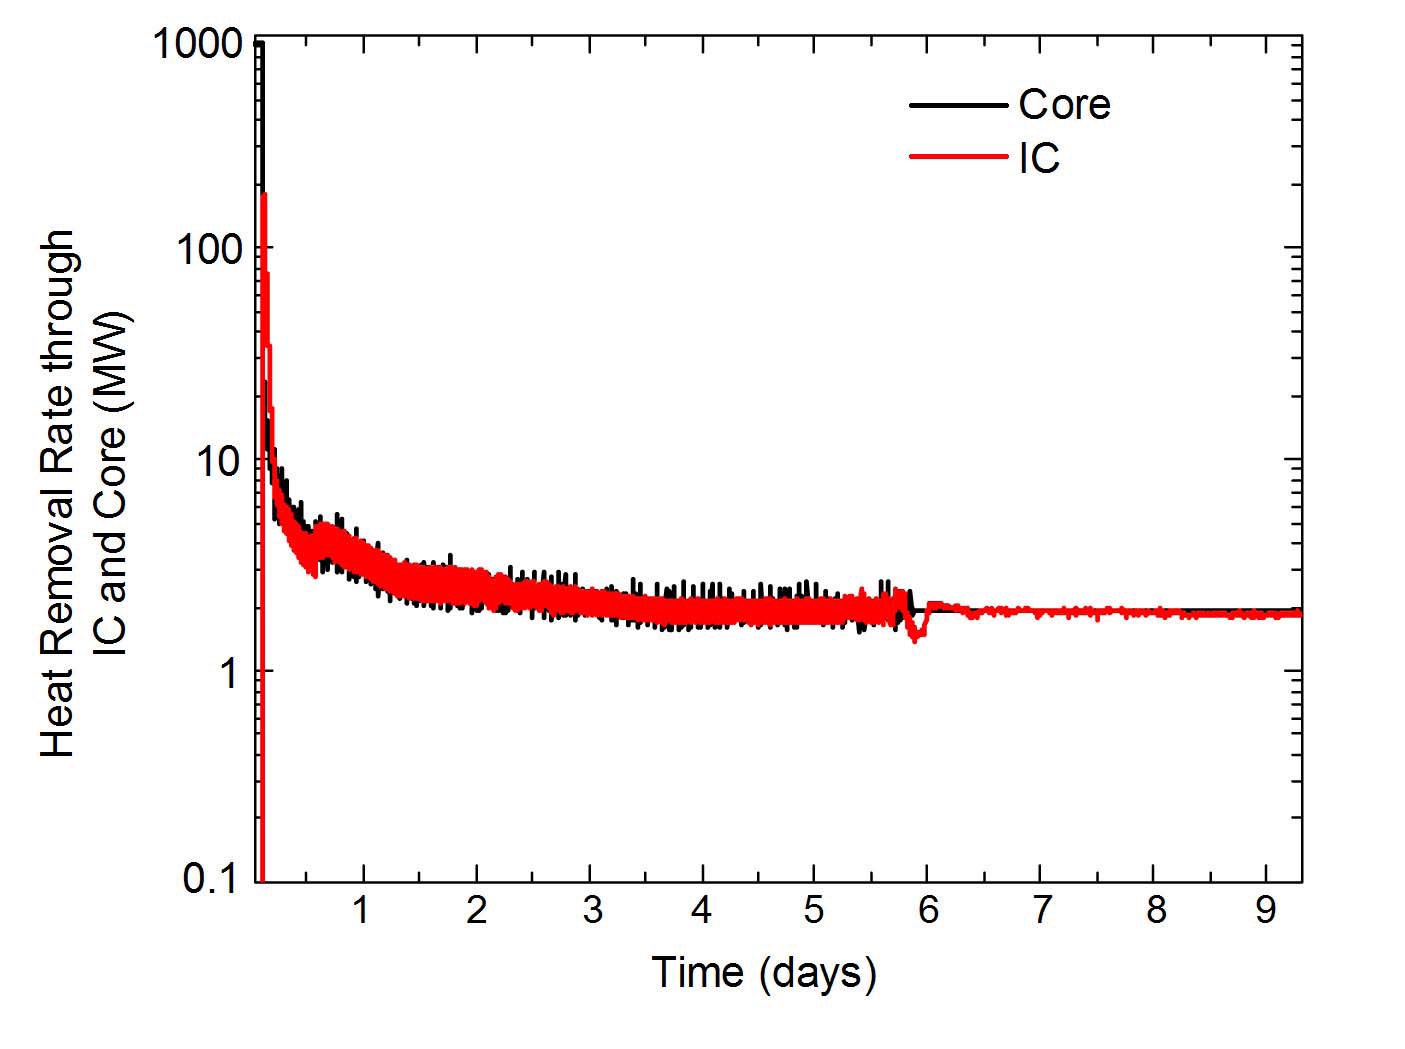 Comparison of Core and IC Heat Removal Rate during Fukushima-like Accident